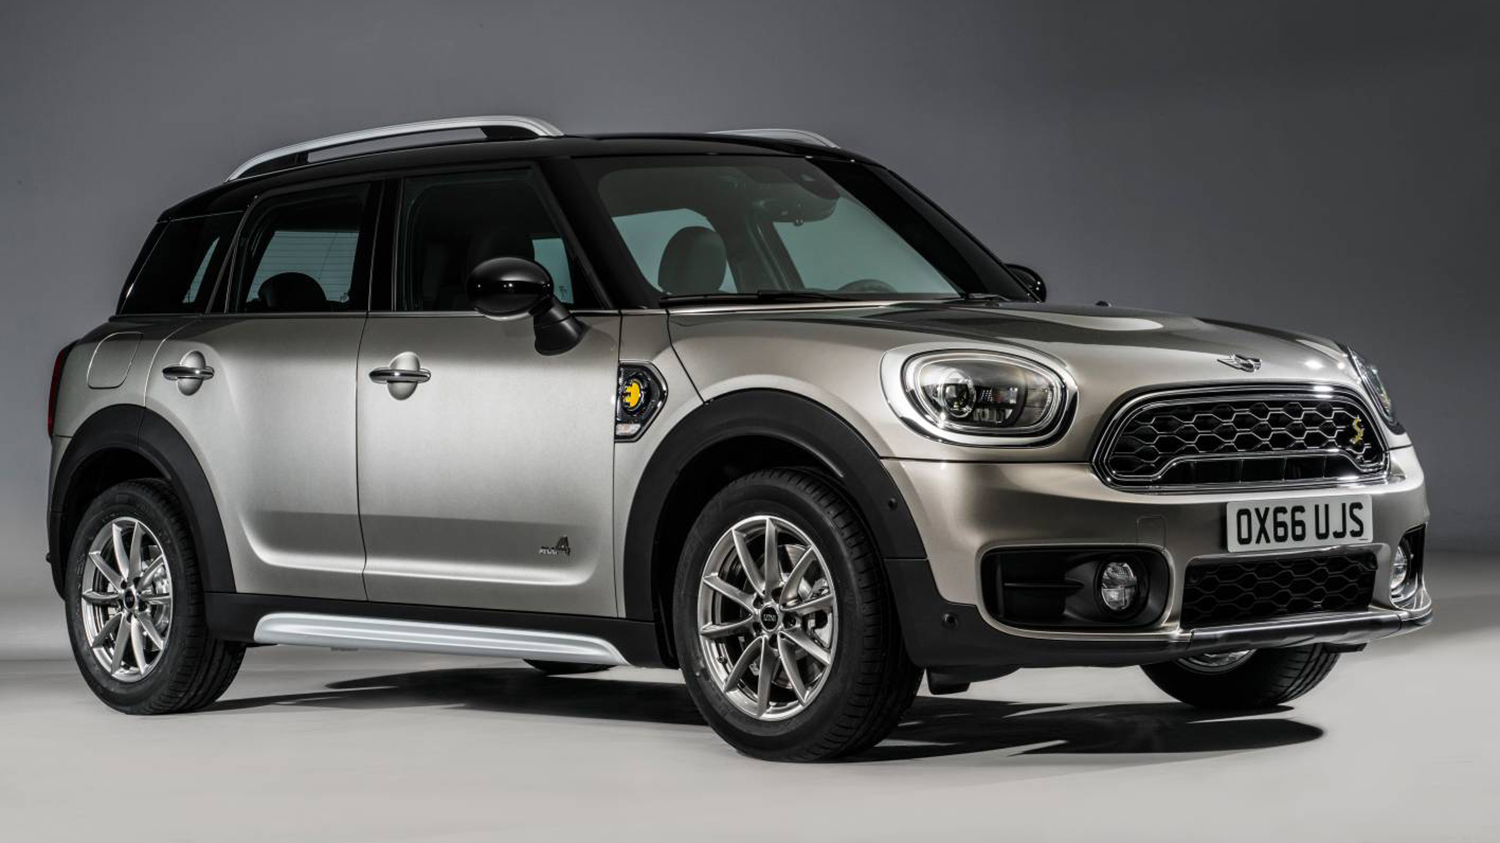 2017 Mini Cooper S E Countryman All4: Brand's first PHEV detailed, on the cards for ...1500 x 843